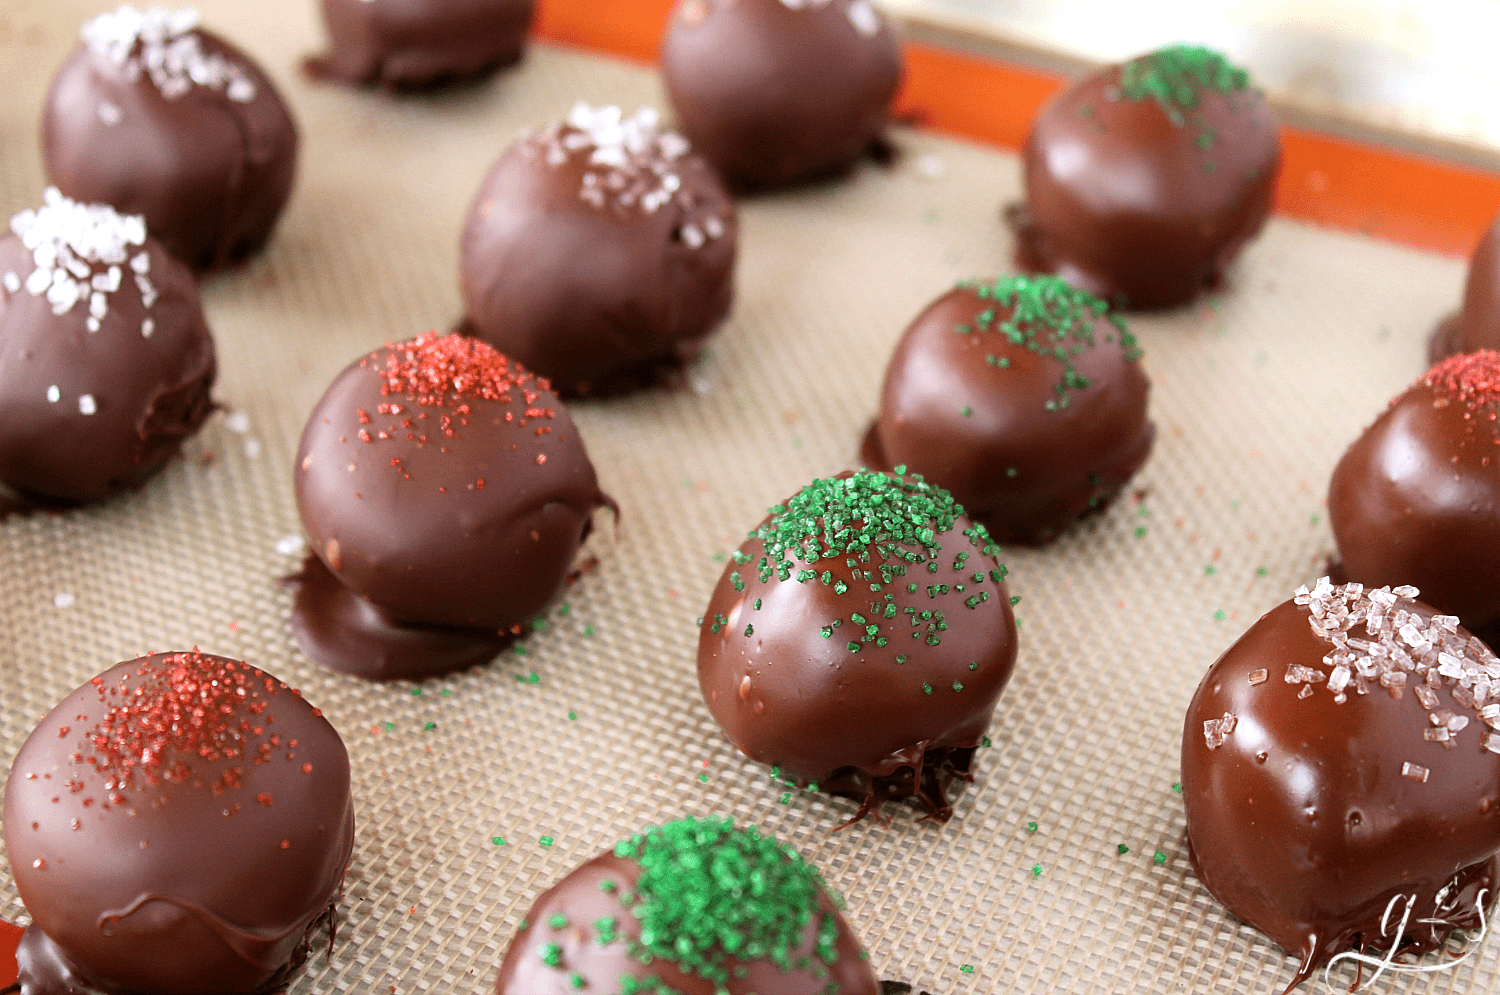 A tray of hot cocoa truffles sprinkled with green and red sanding sugar.